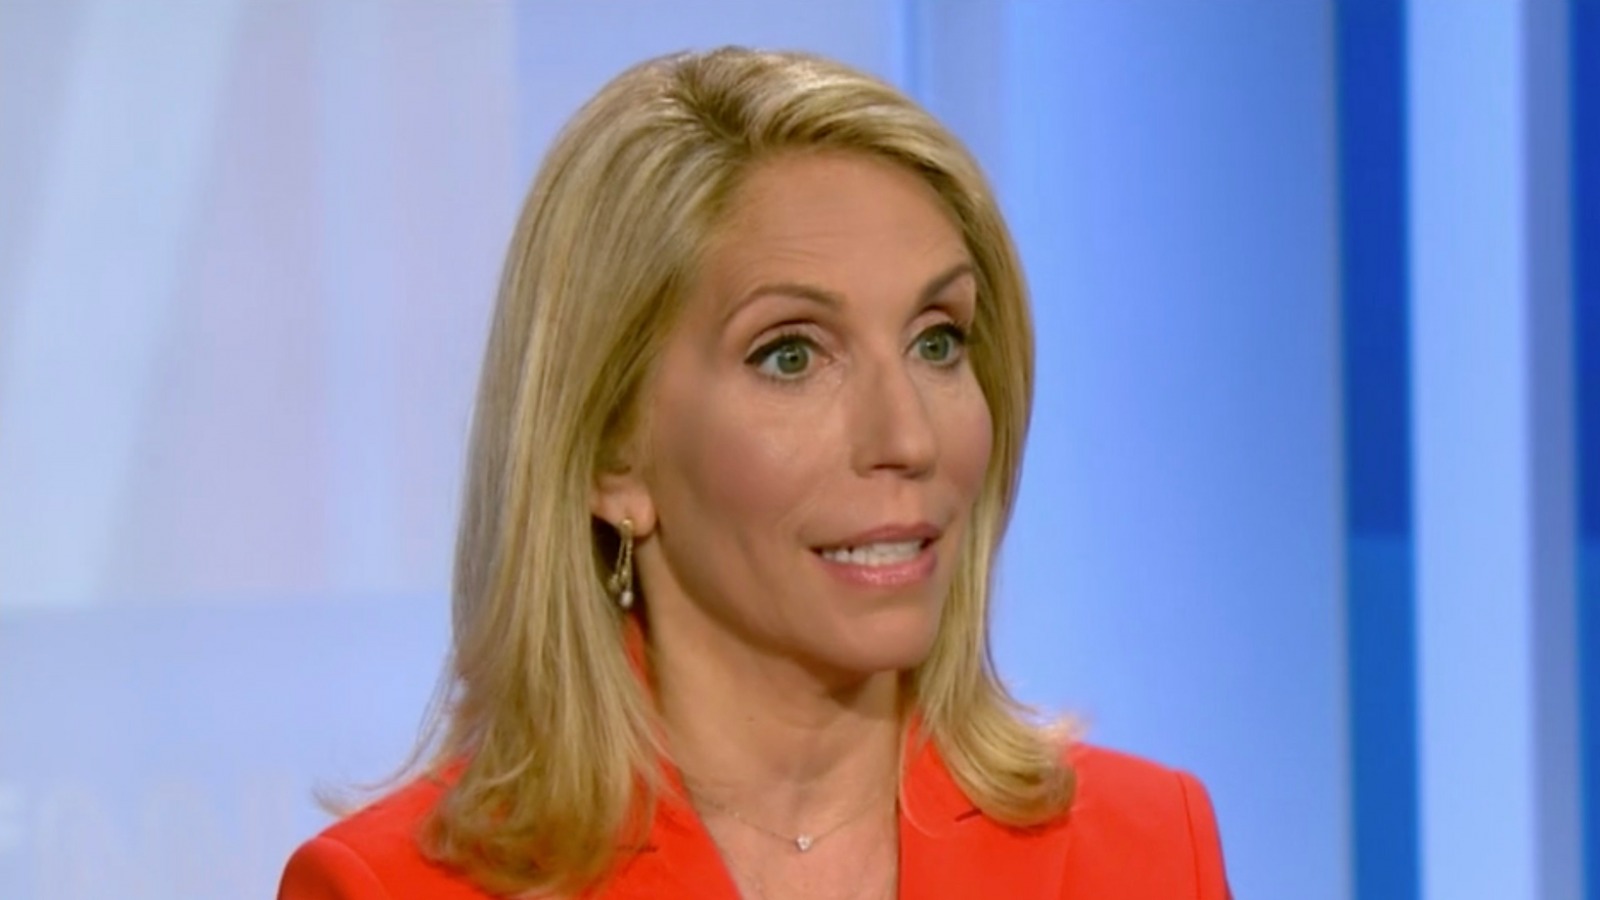 CNN anchor Dana Bash had the most memorable quote in the aftermath of the f...